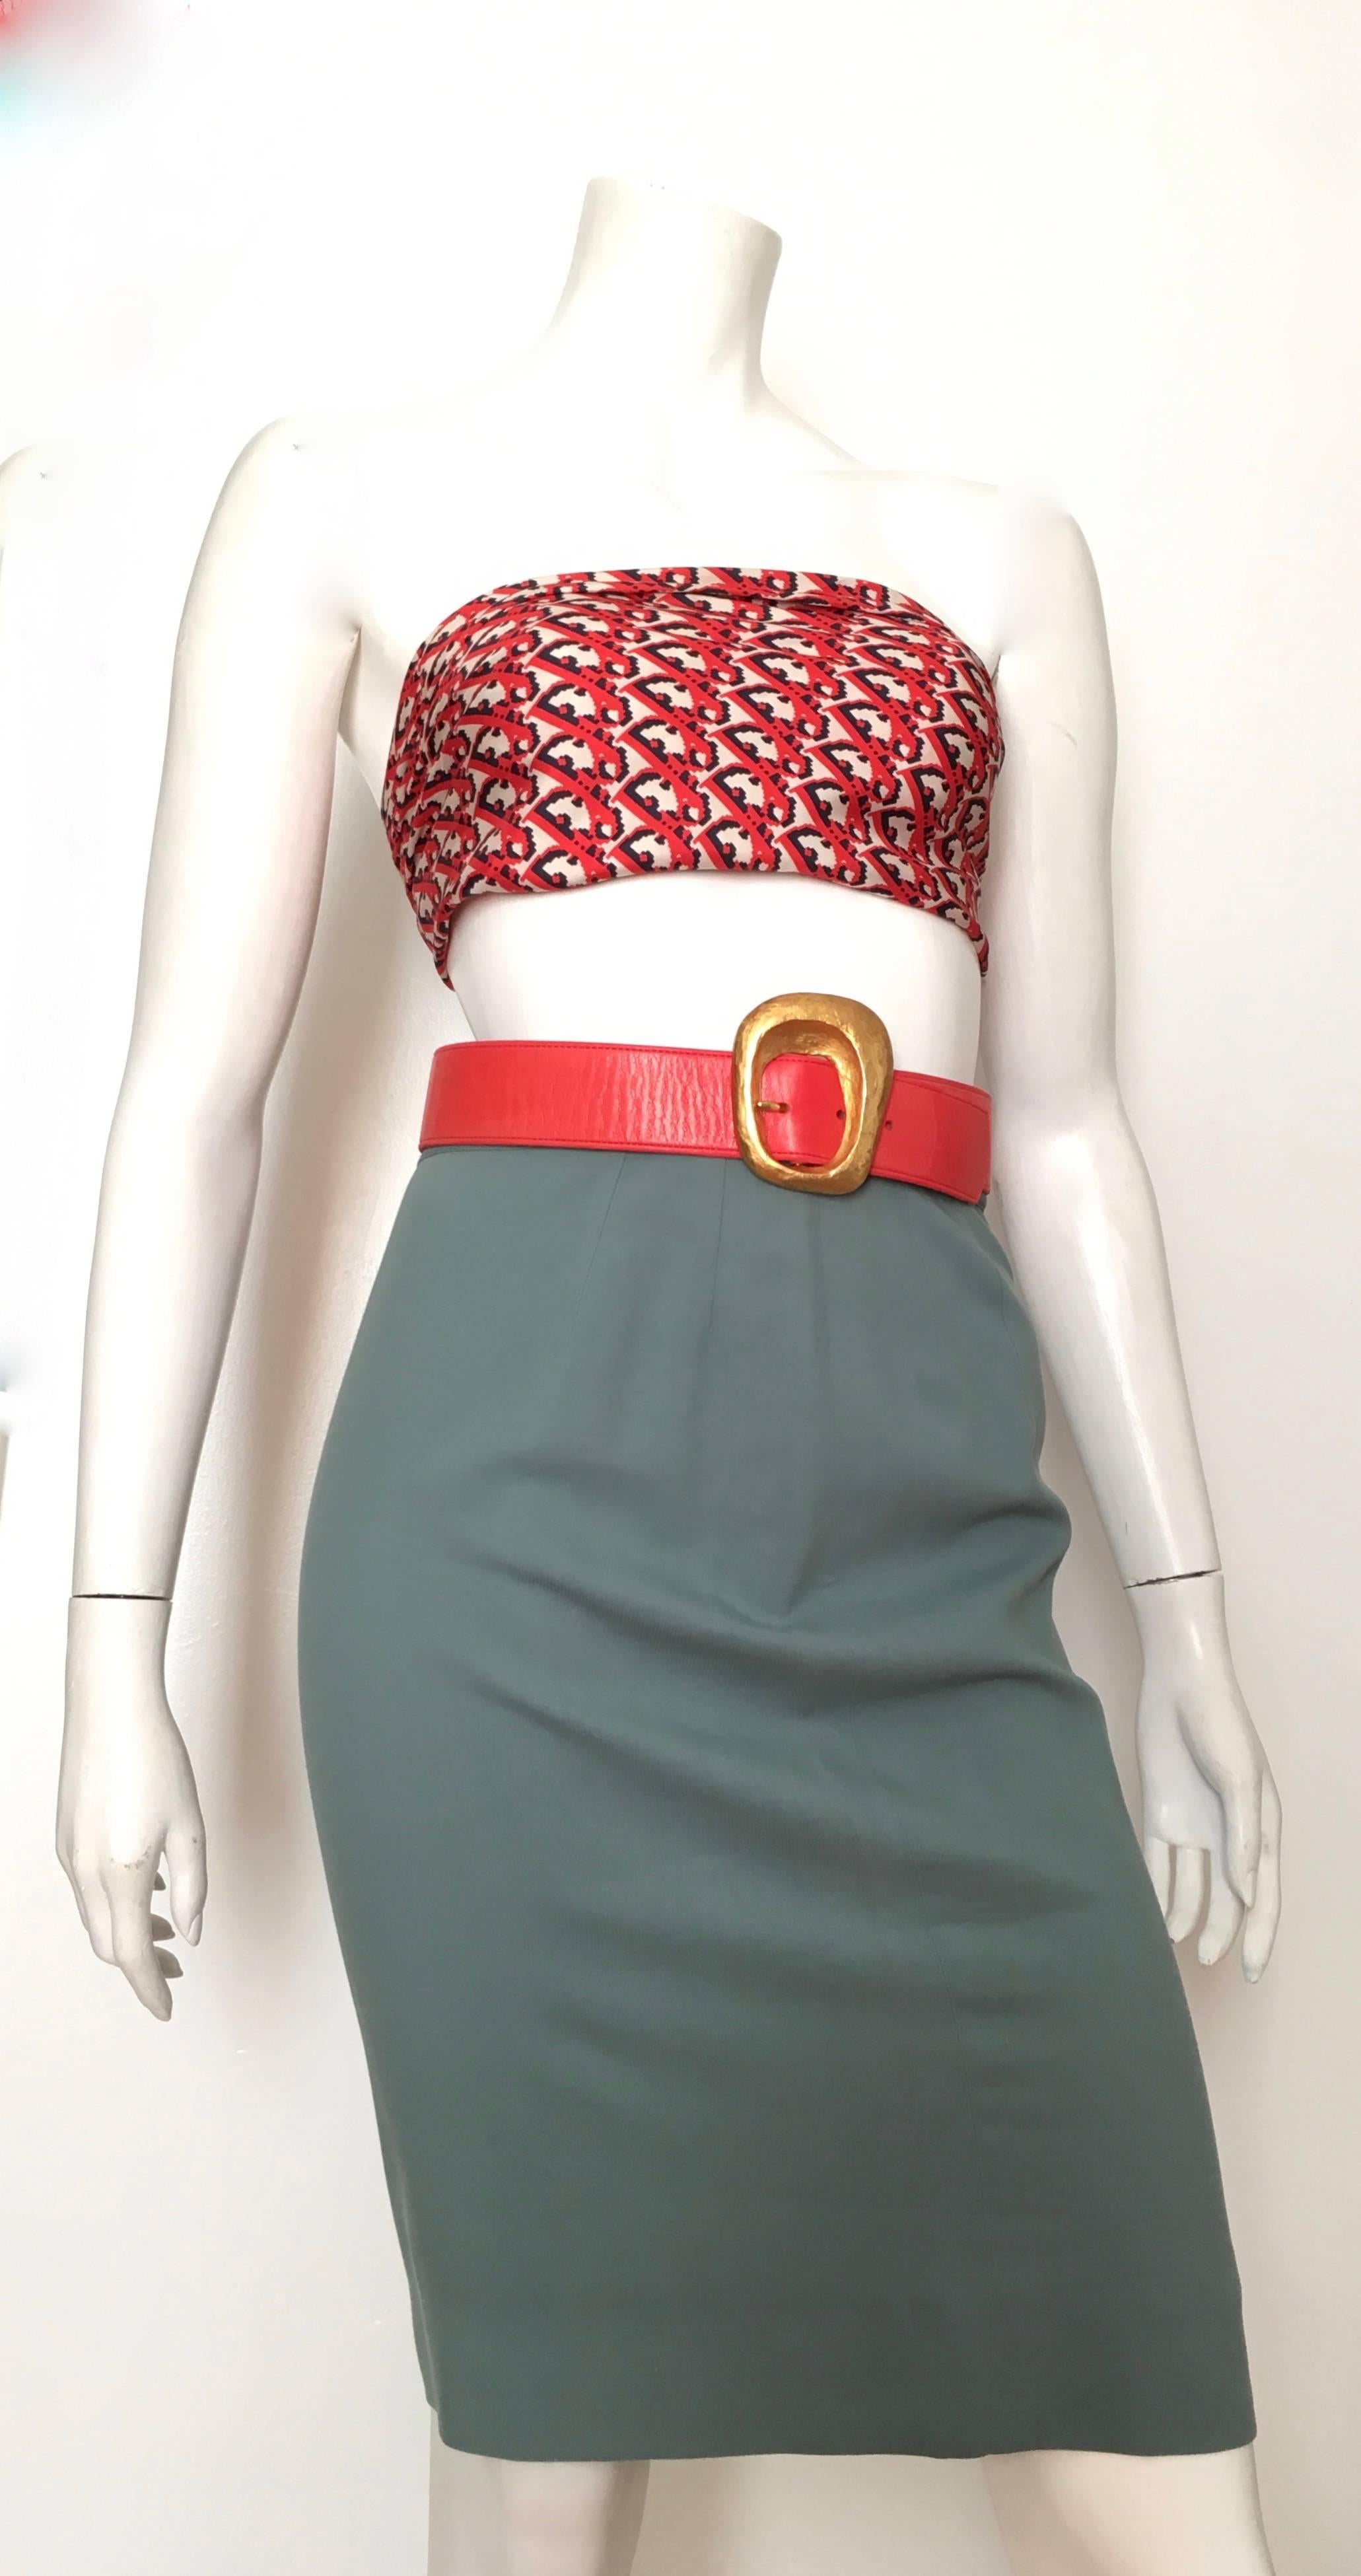 Ferragamo 1980s cotton pencil skirt is a size 6.  Ladies please grab your trusted friend, Mr. Tape Measure, so you can measure your waist, hips and length to make certain this gorgeous classic Ferragamo skirt will fit your lovely body.  The color is